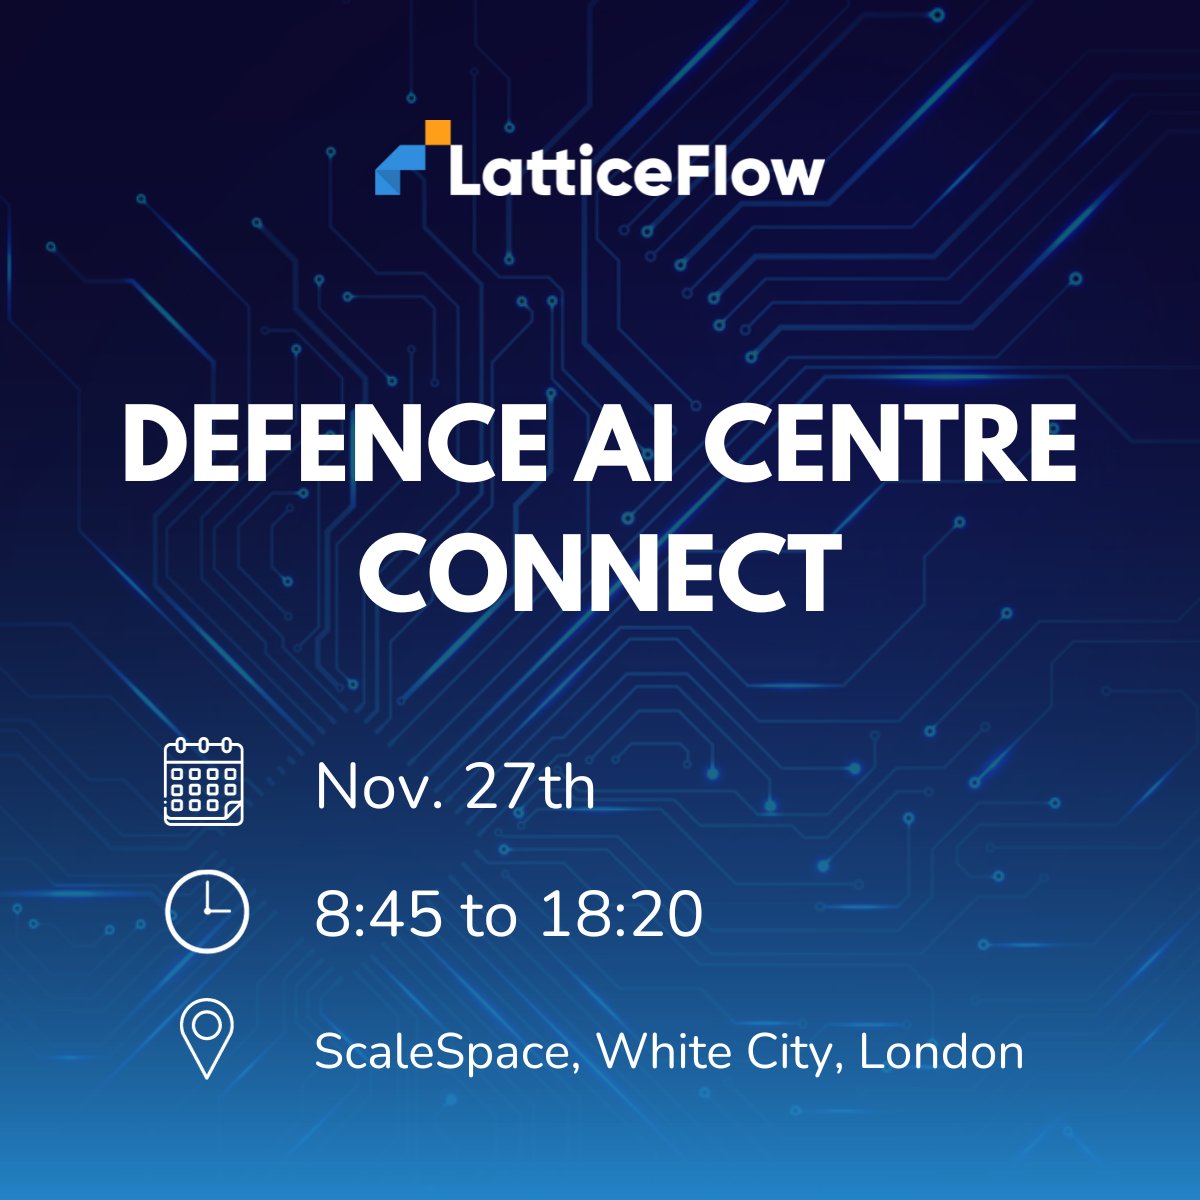 🛡️ @latticeflowai will be at DAIC Connect on Nov 27th! 🗓️
Join us in exploring the future of #AI in #defense at this key industry event. Looking forward to connecting with fellow professionals and diving into the latest in #defenseAI.

#DAICConnect #TechInnovation